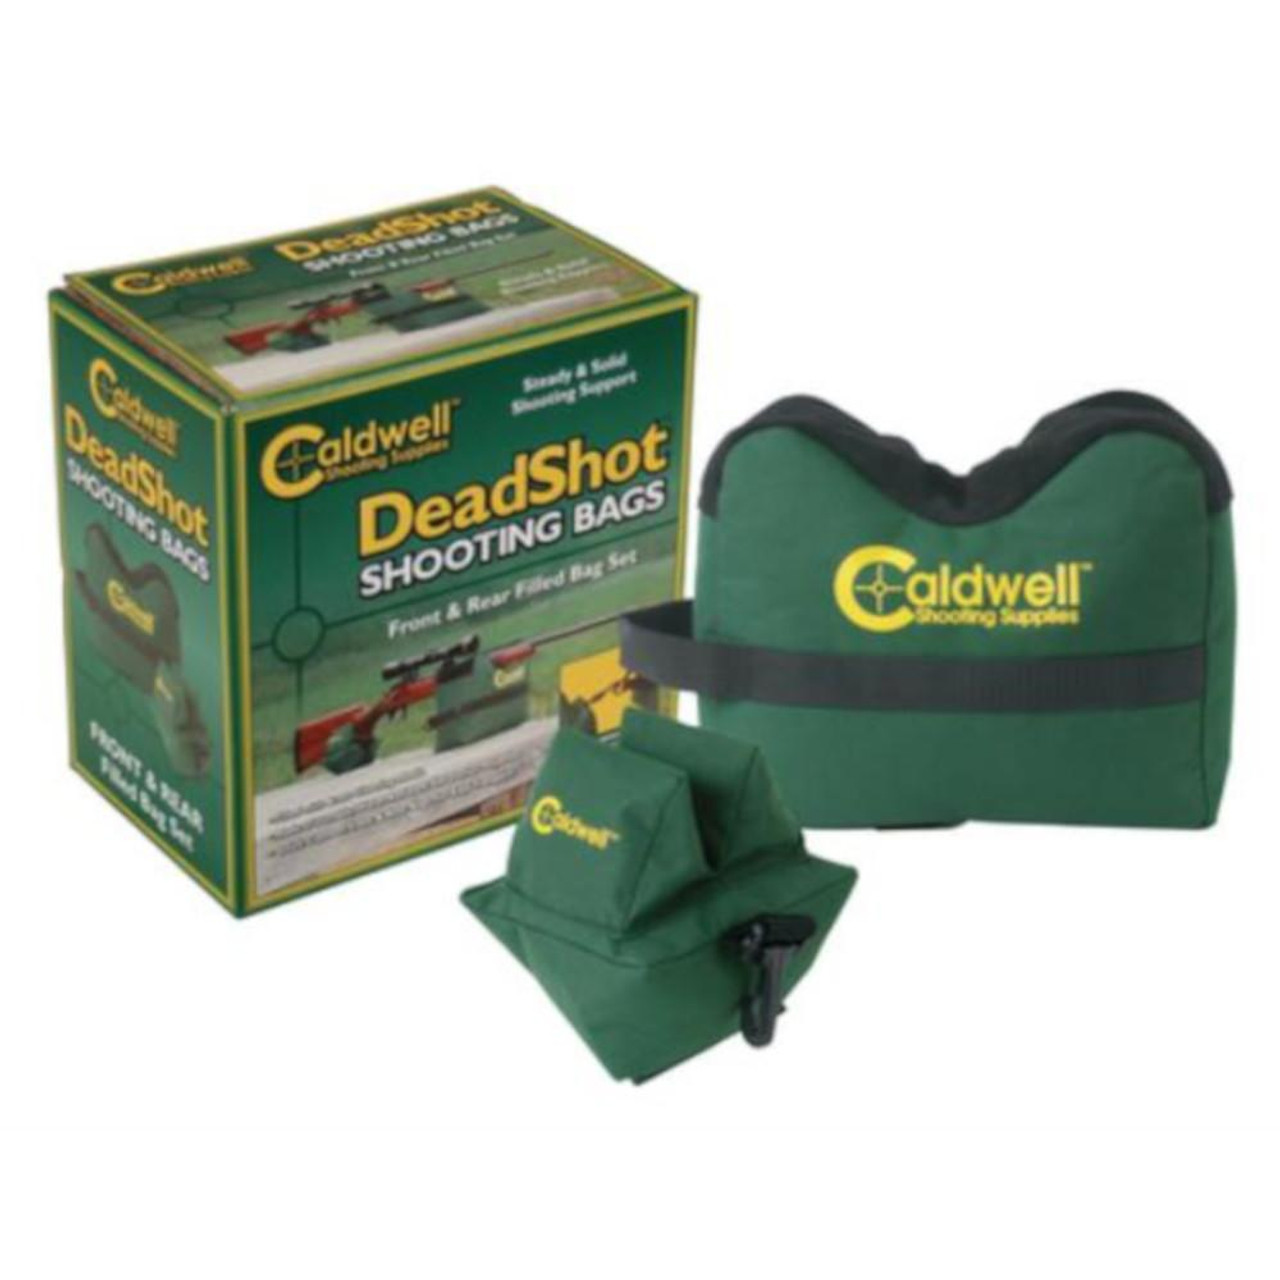 Whether you have minutes or seconds to set up for your next shot, the DeadShot Shooting Bags are the answer. These inexpensive and functional bags continue to set the industry standard for quality and functional shooting bags.

Type of Bag: Front and Rear Bag
Prefilled-Empty: Prefilled
Material: 600D Polyester